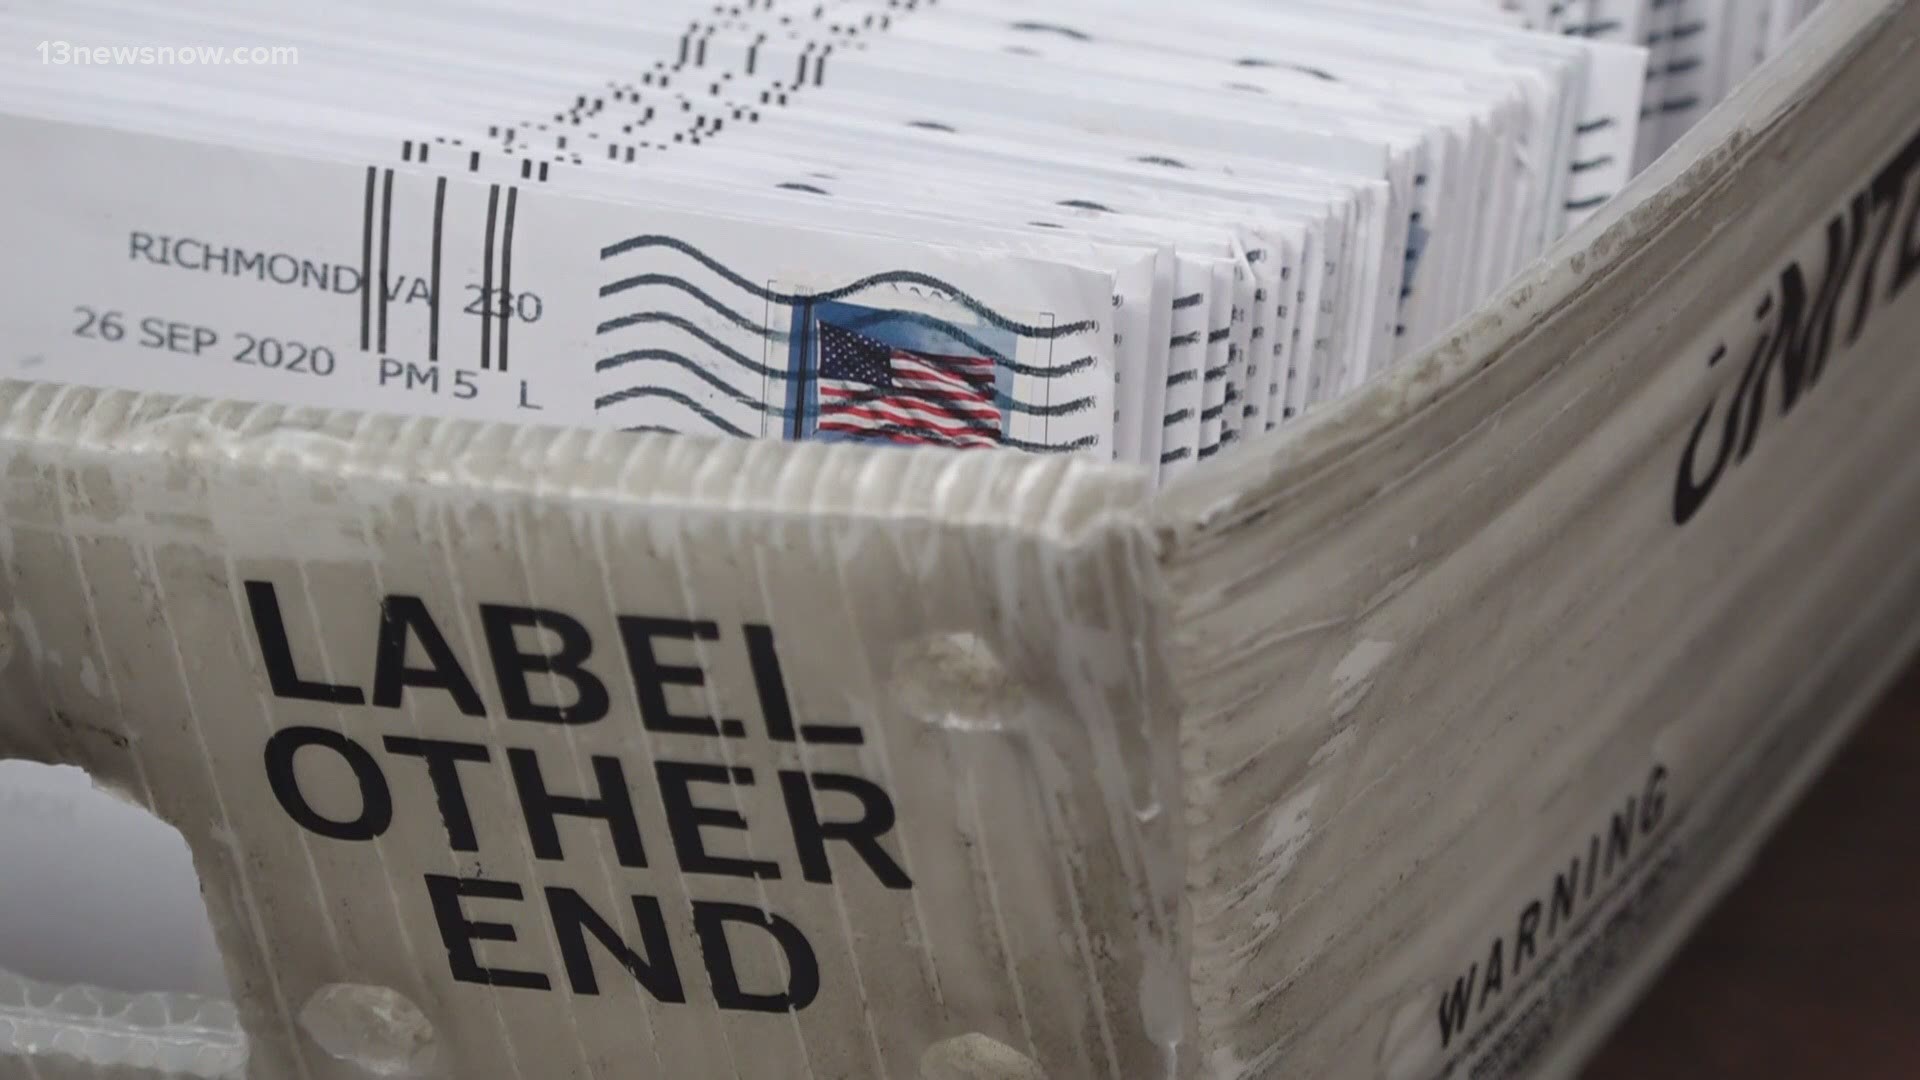 The Supreme Court has upheld a decision to allow absentee ballots mailed by Election Day in North Carolina to count so long as they are received within 9 days.